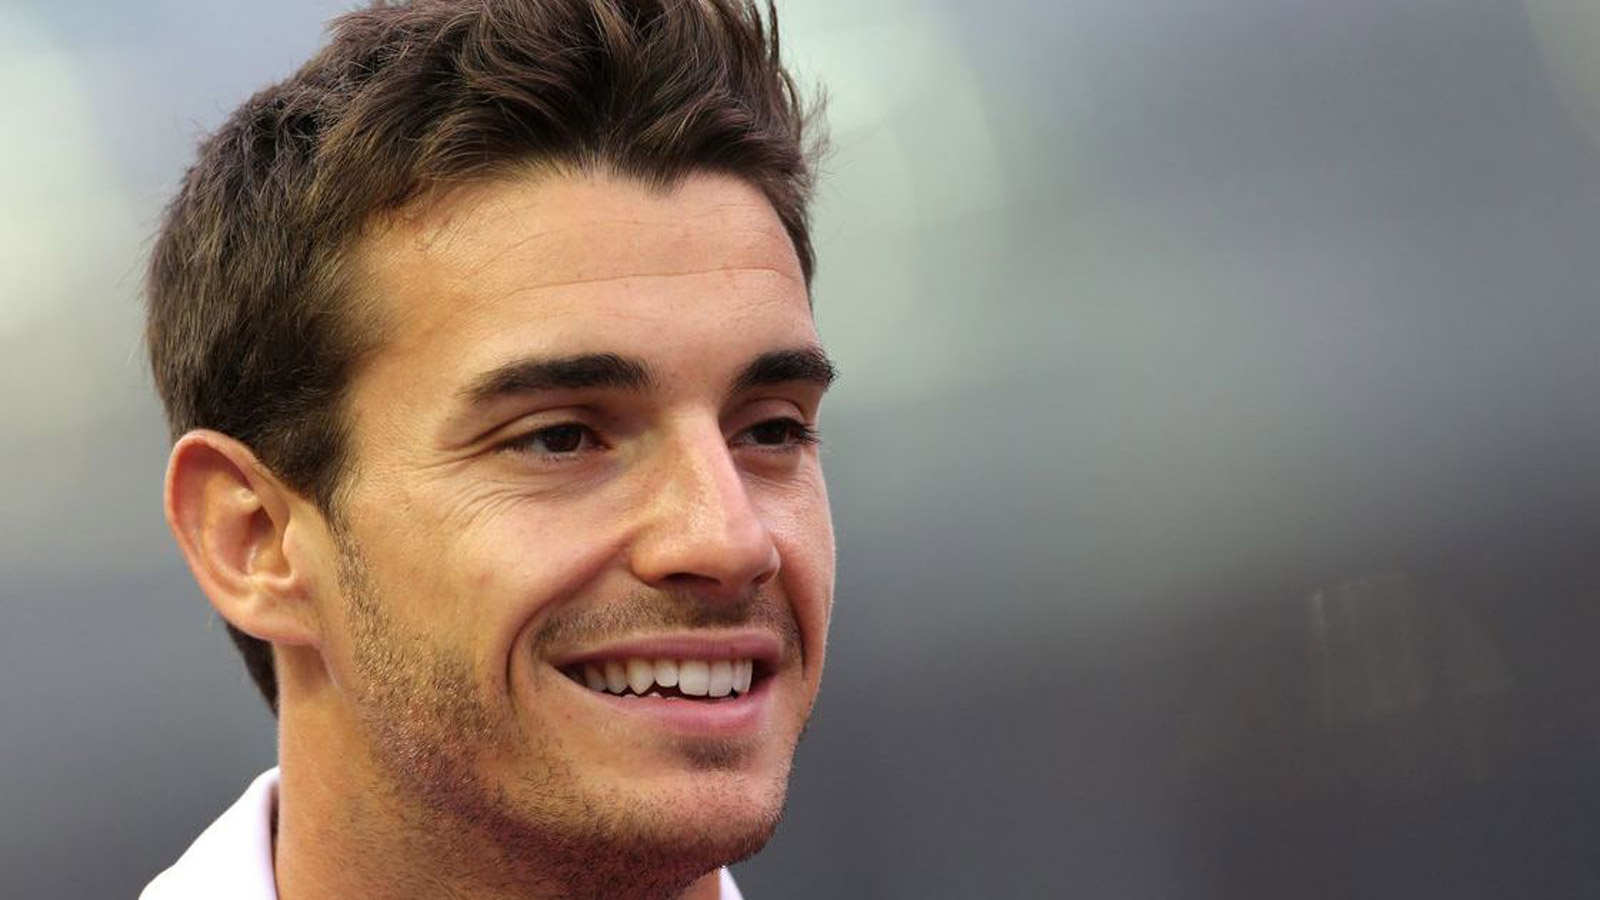 Injured Formula One Driver Jules Bianchi No Longer In Induced Coma